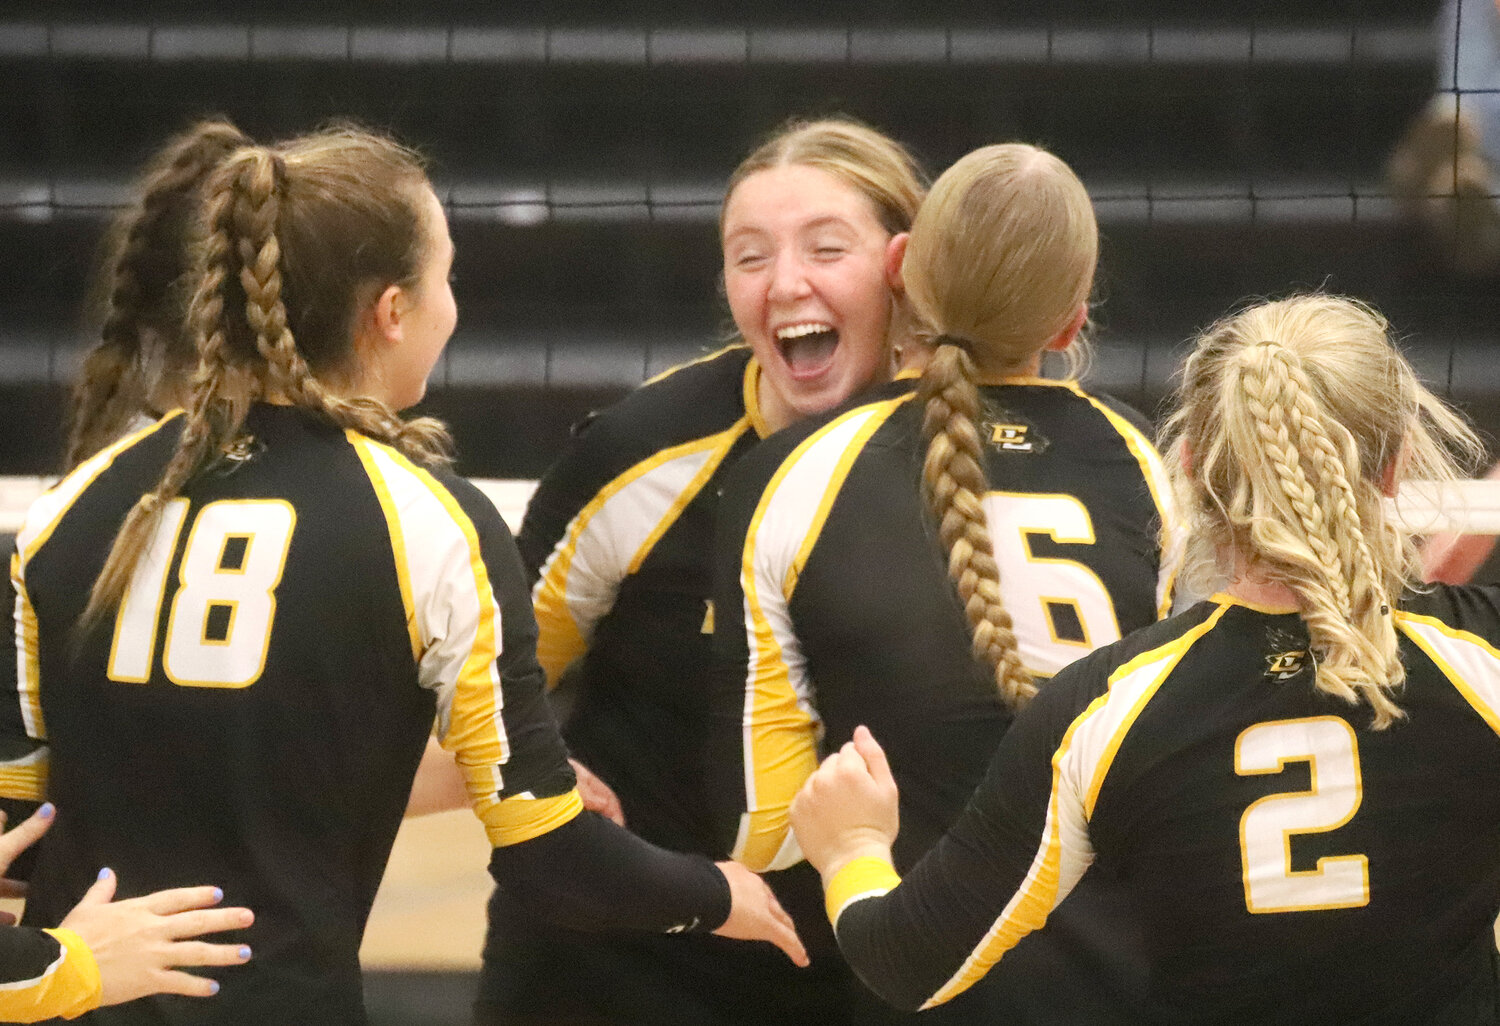 The Central Lee Hawks celebrate after rallying in a two-match tiebreaker set to take Pool 4's No. 1 seed in the Southeast Iowa Superconference volleyball tournament at Central Lee High School.